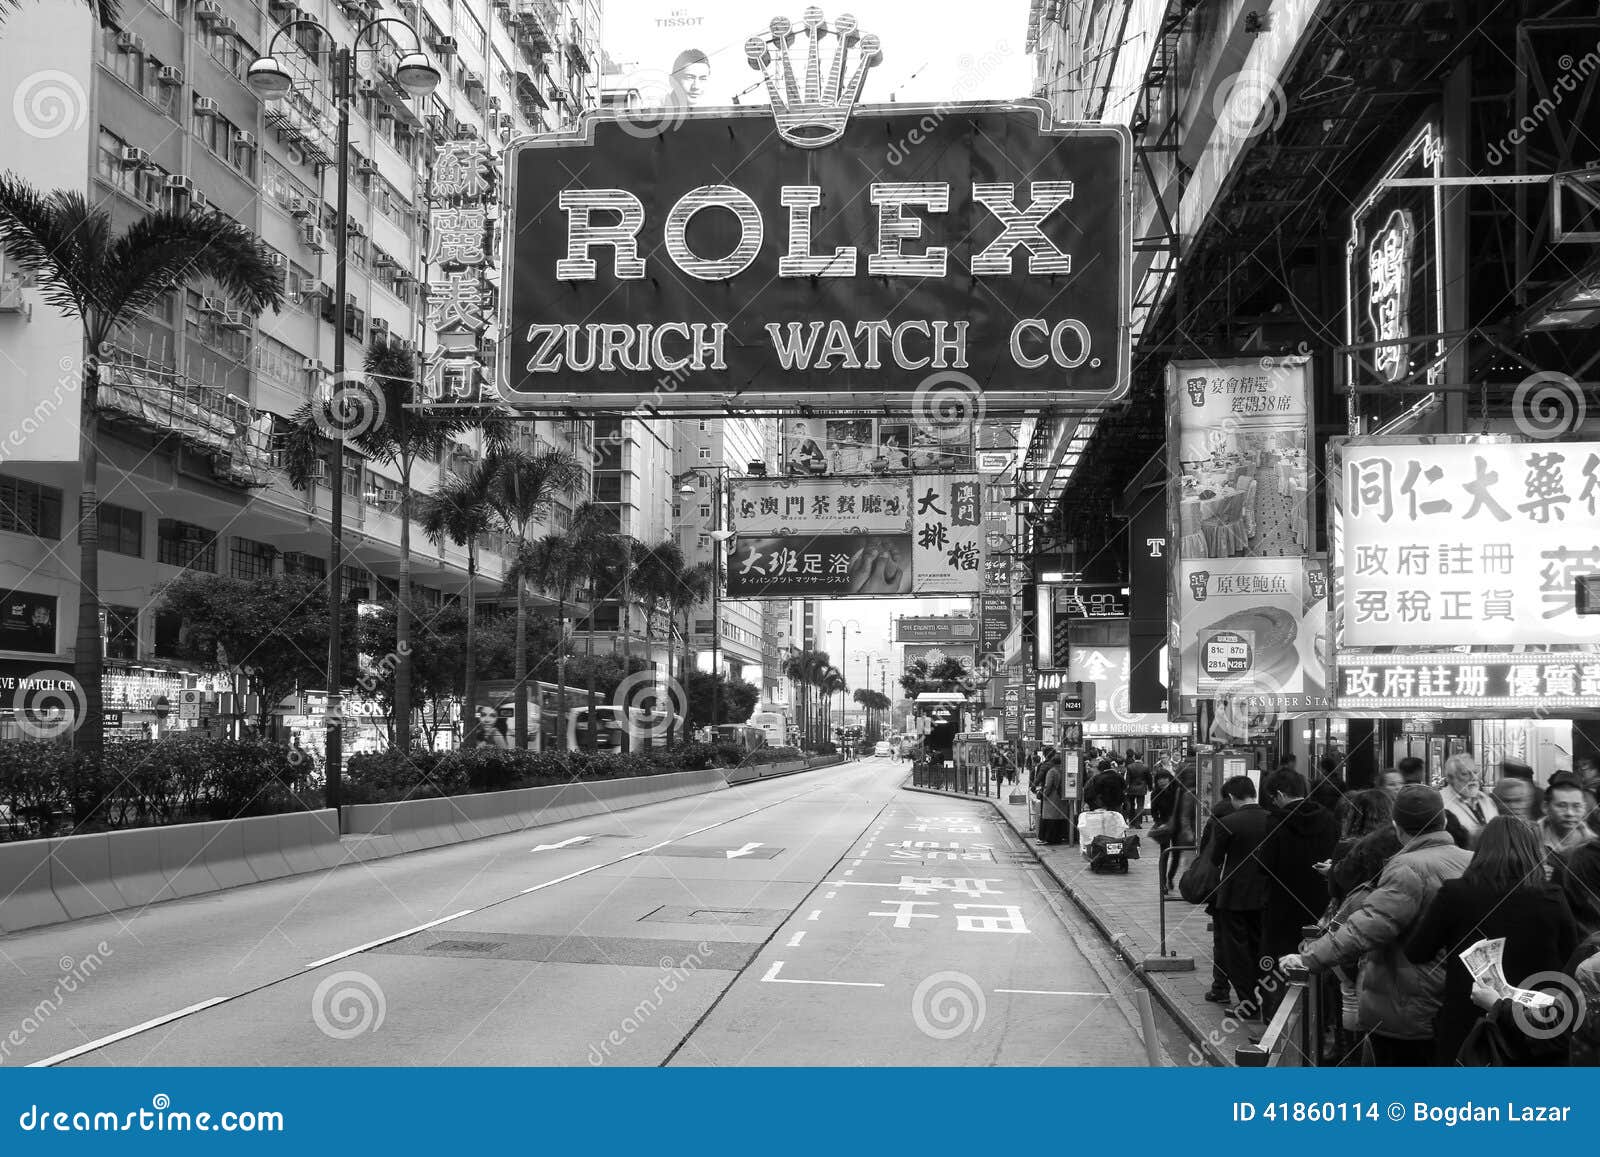 Rolex Advertisment In Hong Kong Editorial Stock Image - Image of asia, advertisment ...1300 x 957